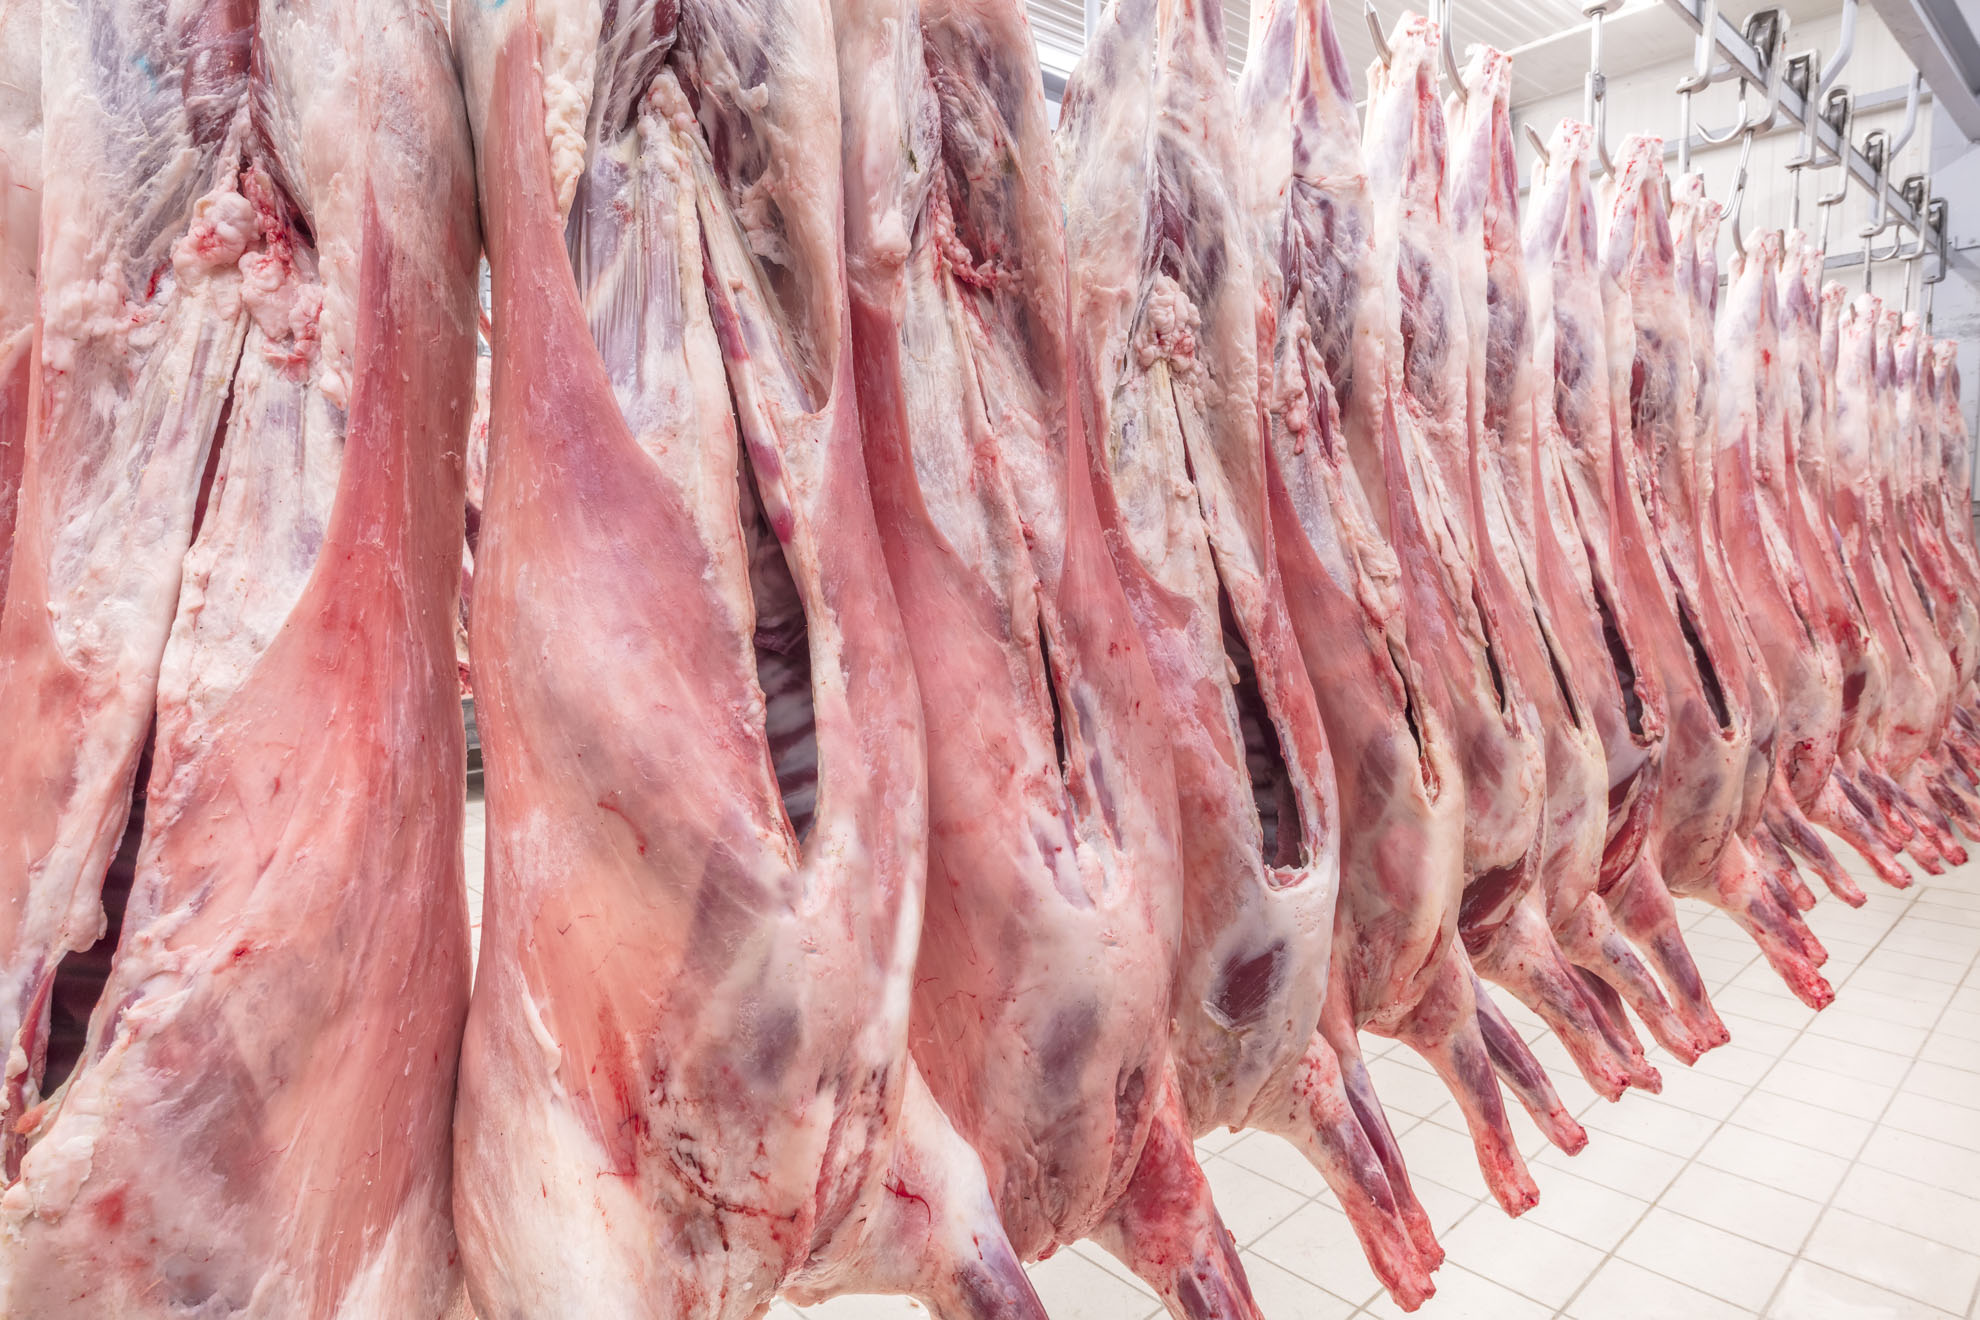 Refrigerated warehouse, hanging hooks of frozen lamb carcasses.Halal Certified   halal cut.